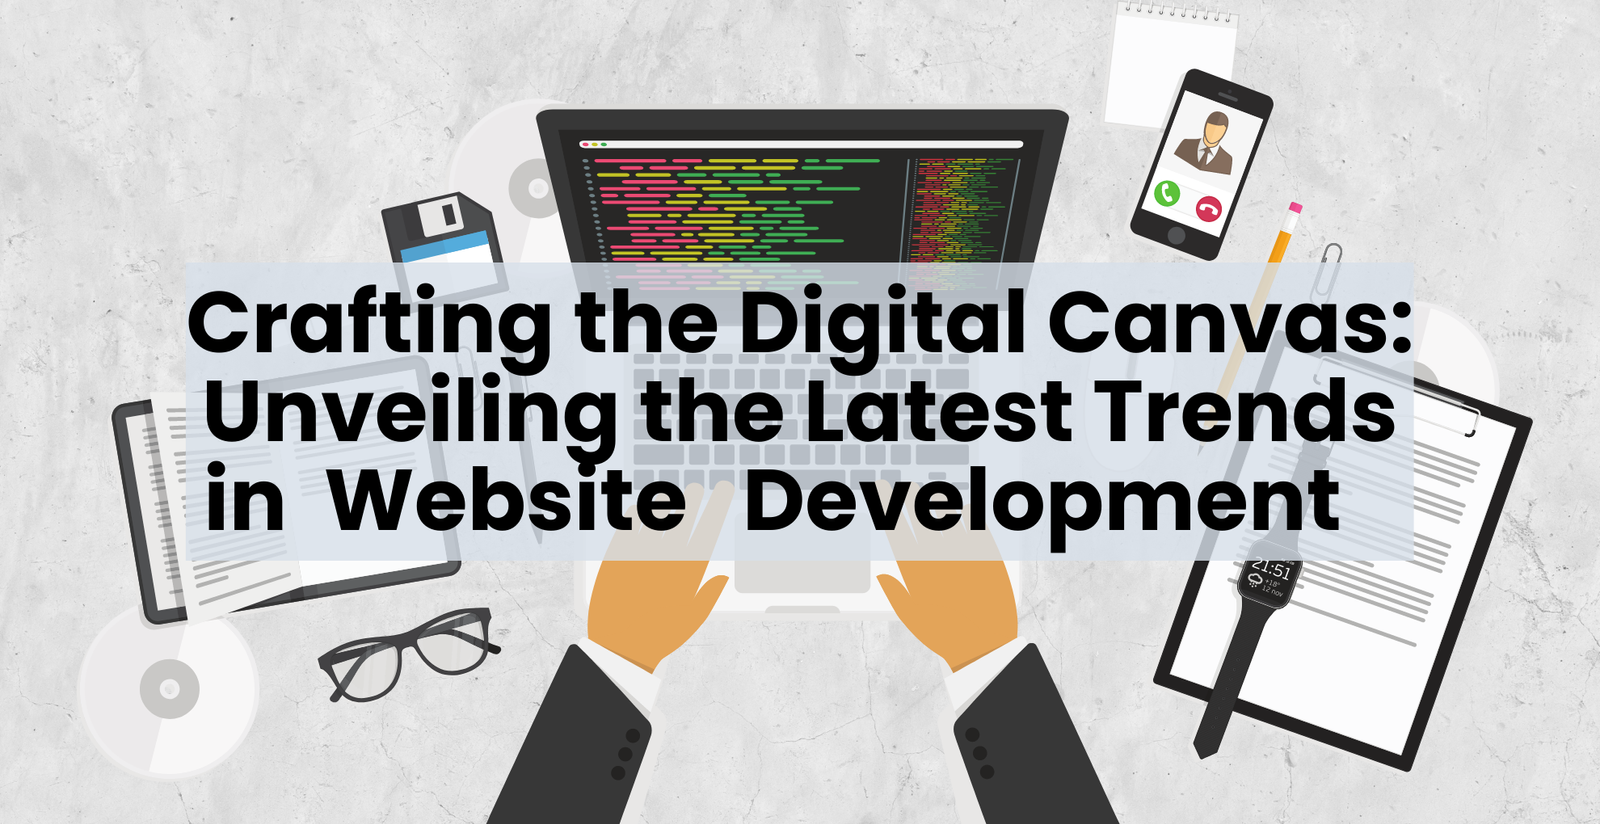 Crafting the Digital Canvas Unveiling the Latest Trends in Website Development